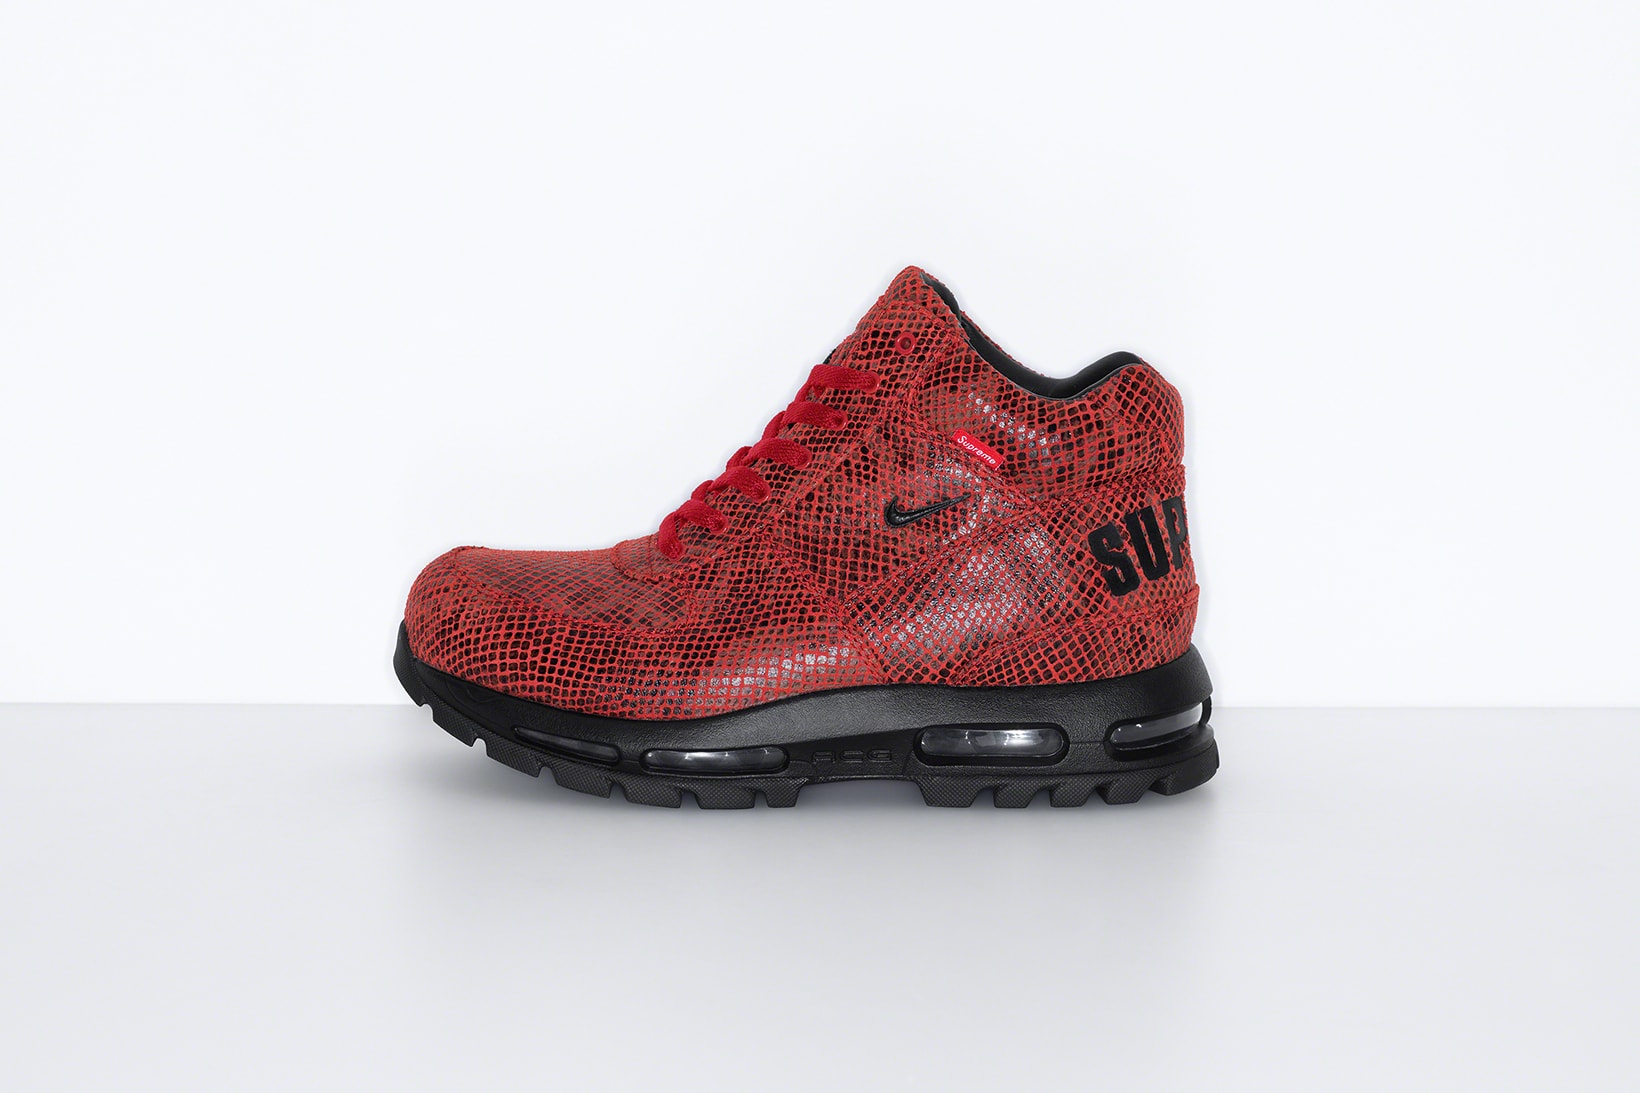 supreme nike goadome collaboration boots footwear shoes snakeskin red colorway black lateral laces